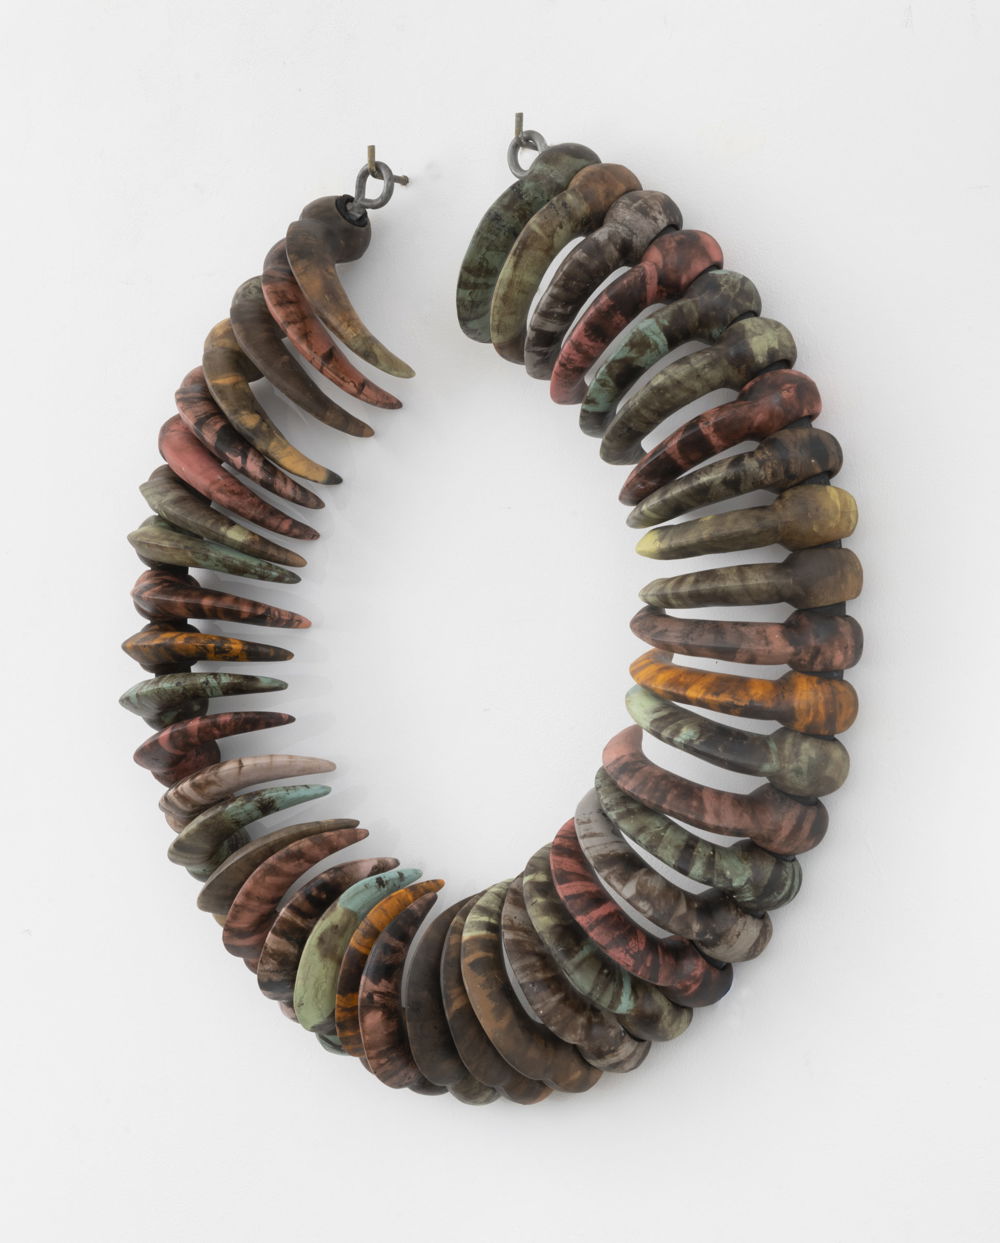 A wreath of curved talons made of polished stones hangs on a white wall. Each talon is uniform in size and shape but is uniquely colored in greens, browns, oranges, and yellows.